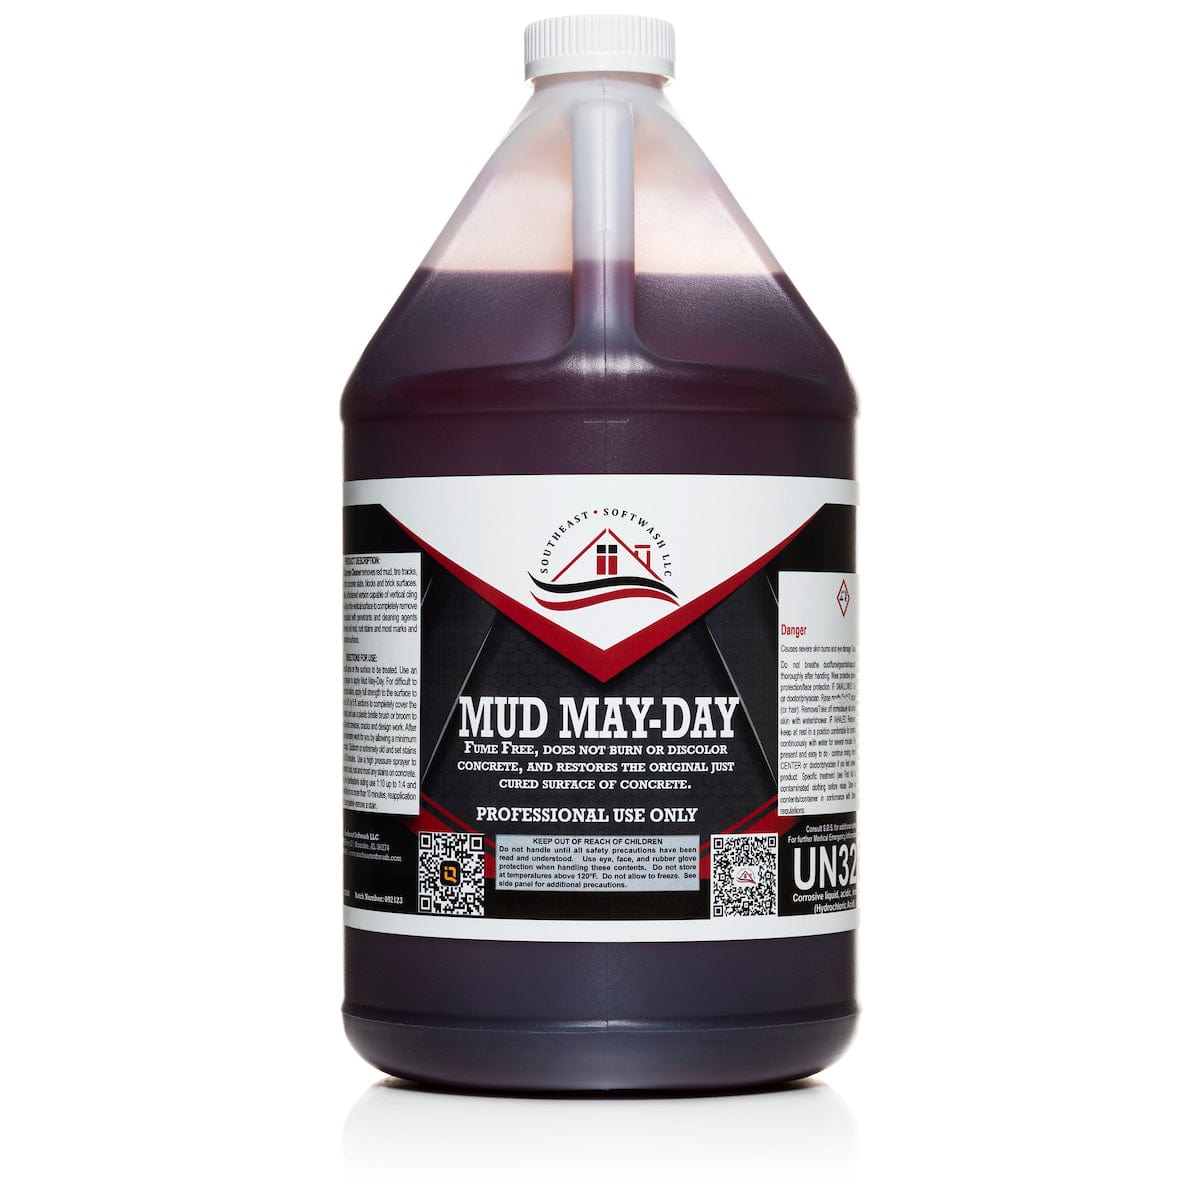 Southeast Softwash 1 gallon jug Mud May-Day Stain Remover